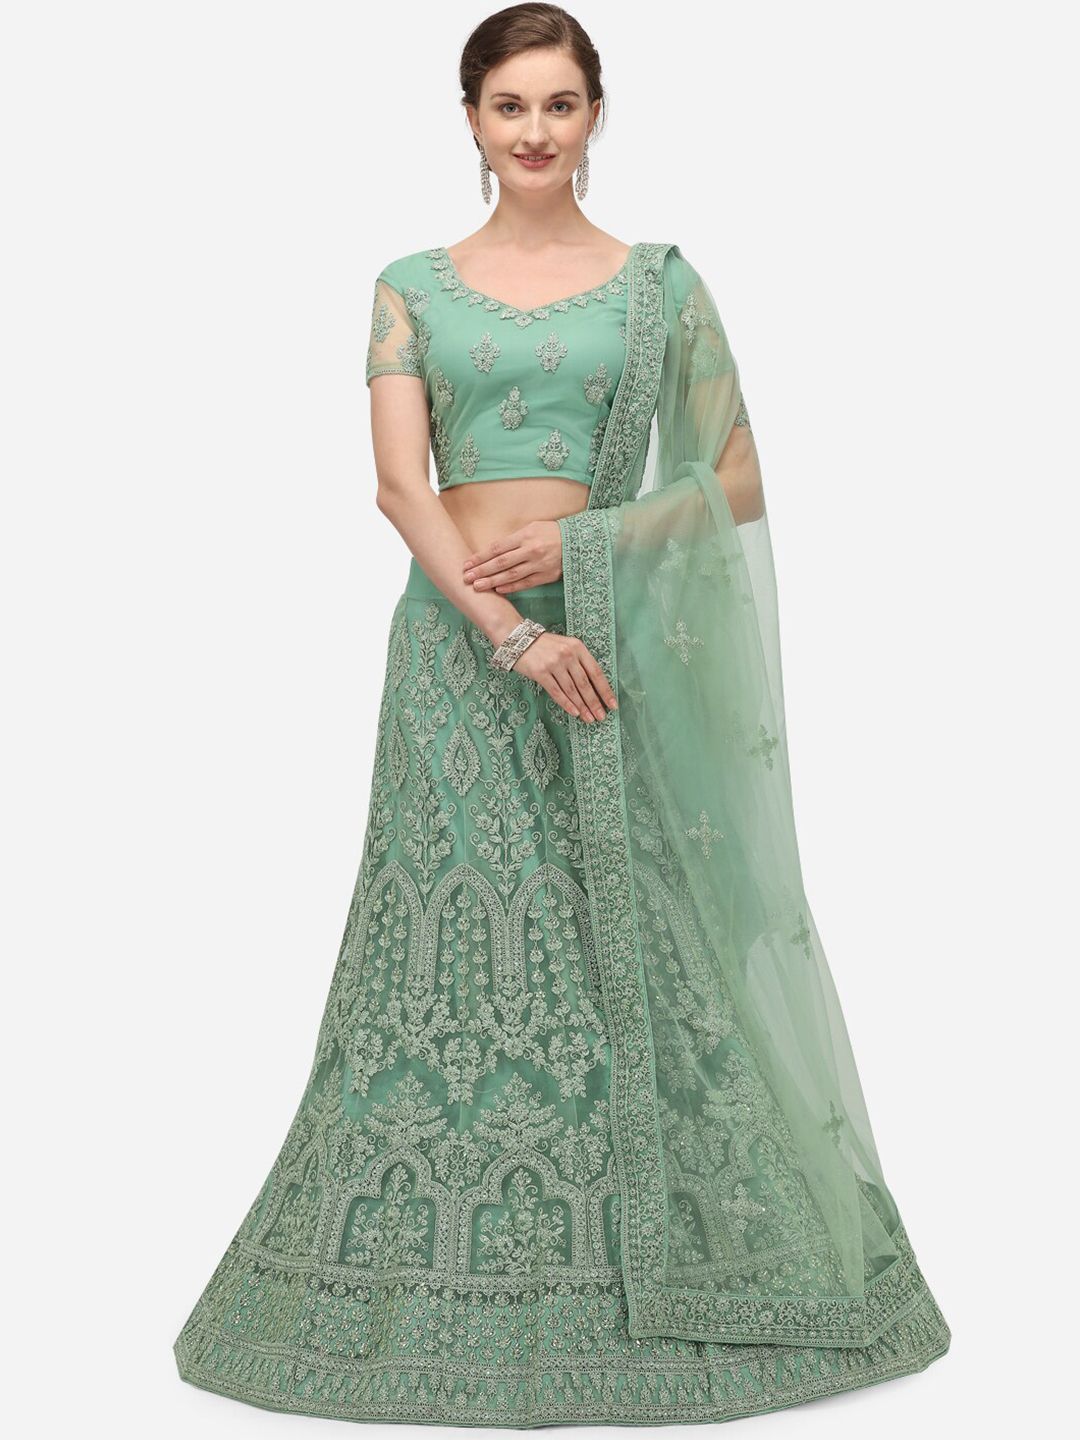 Netram Women Lime Green Embroidered Semi-Stitched Lehenga Choli with Dupatta Price in India